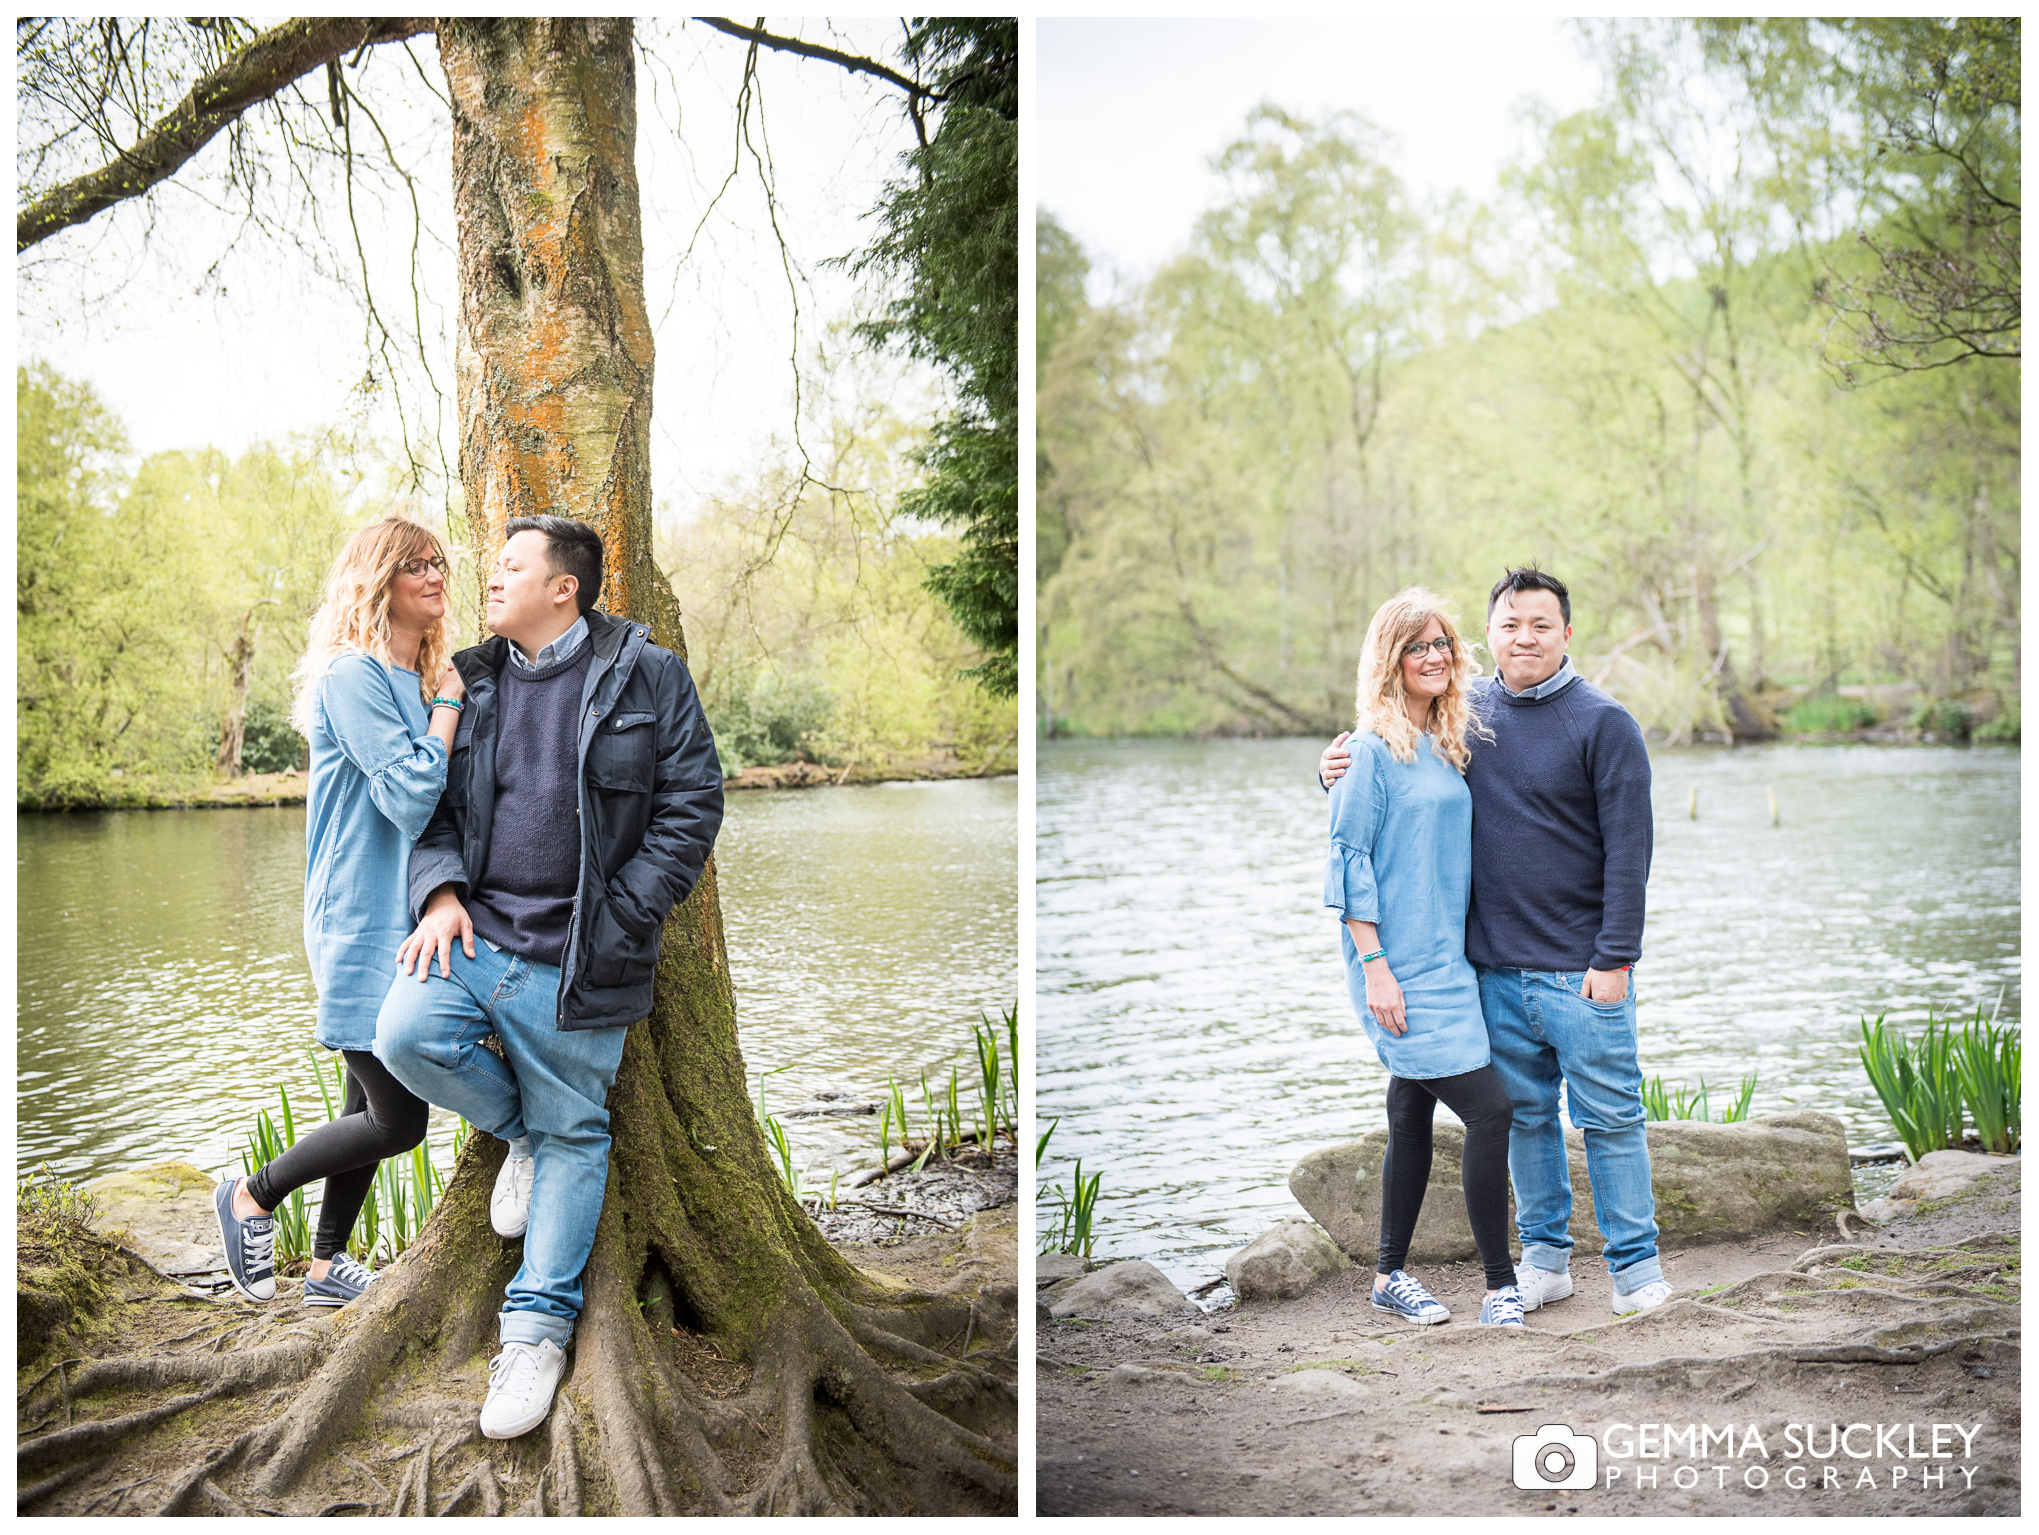 A couple on their engagement shoot in Bingley St Ives